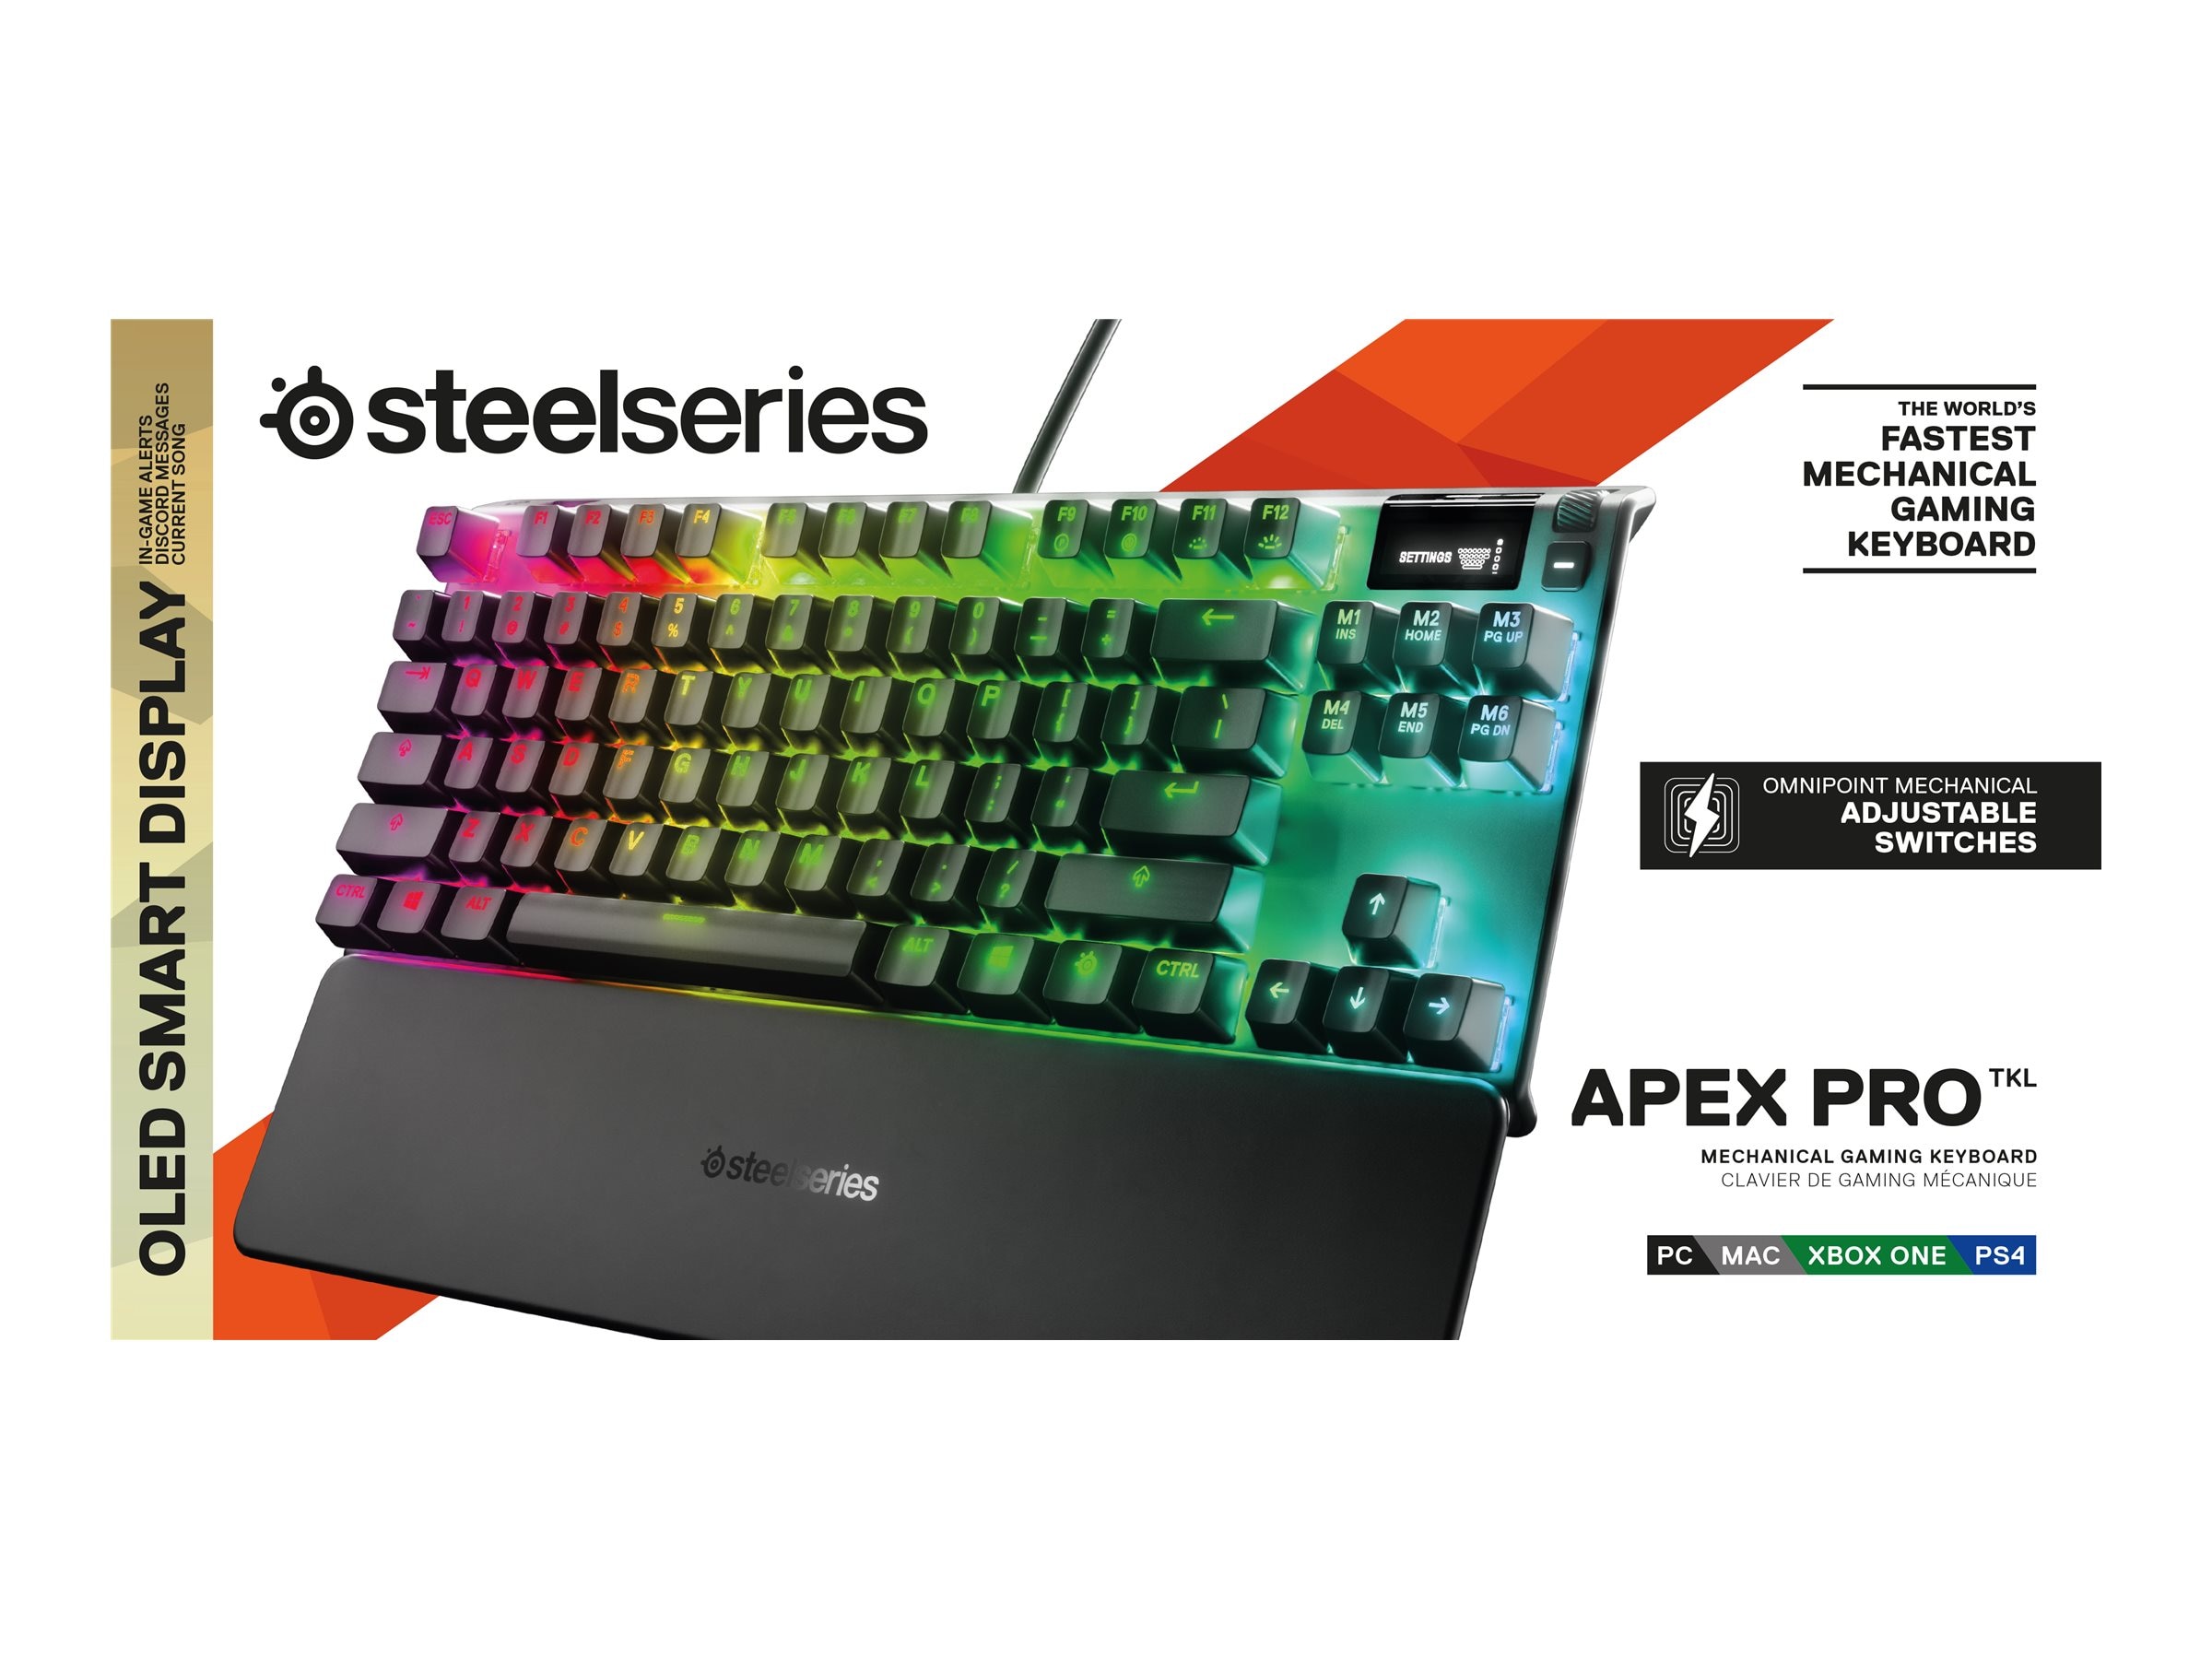 PC/タブレット PC周辺機器 Steelseries Apex Pro TKL Mechanical Gaming Keyboard (64734)